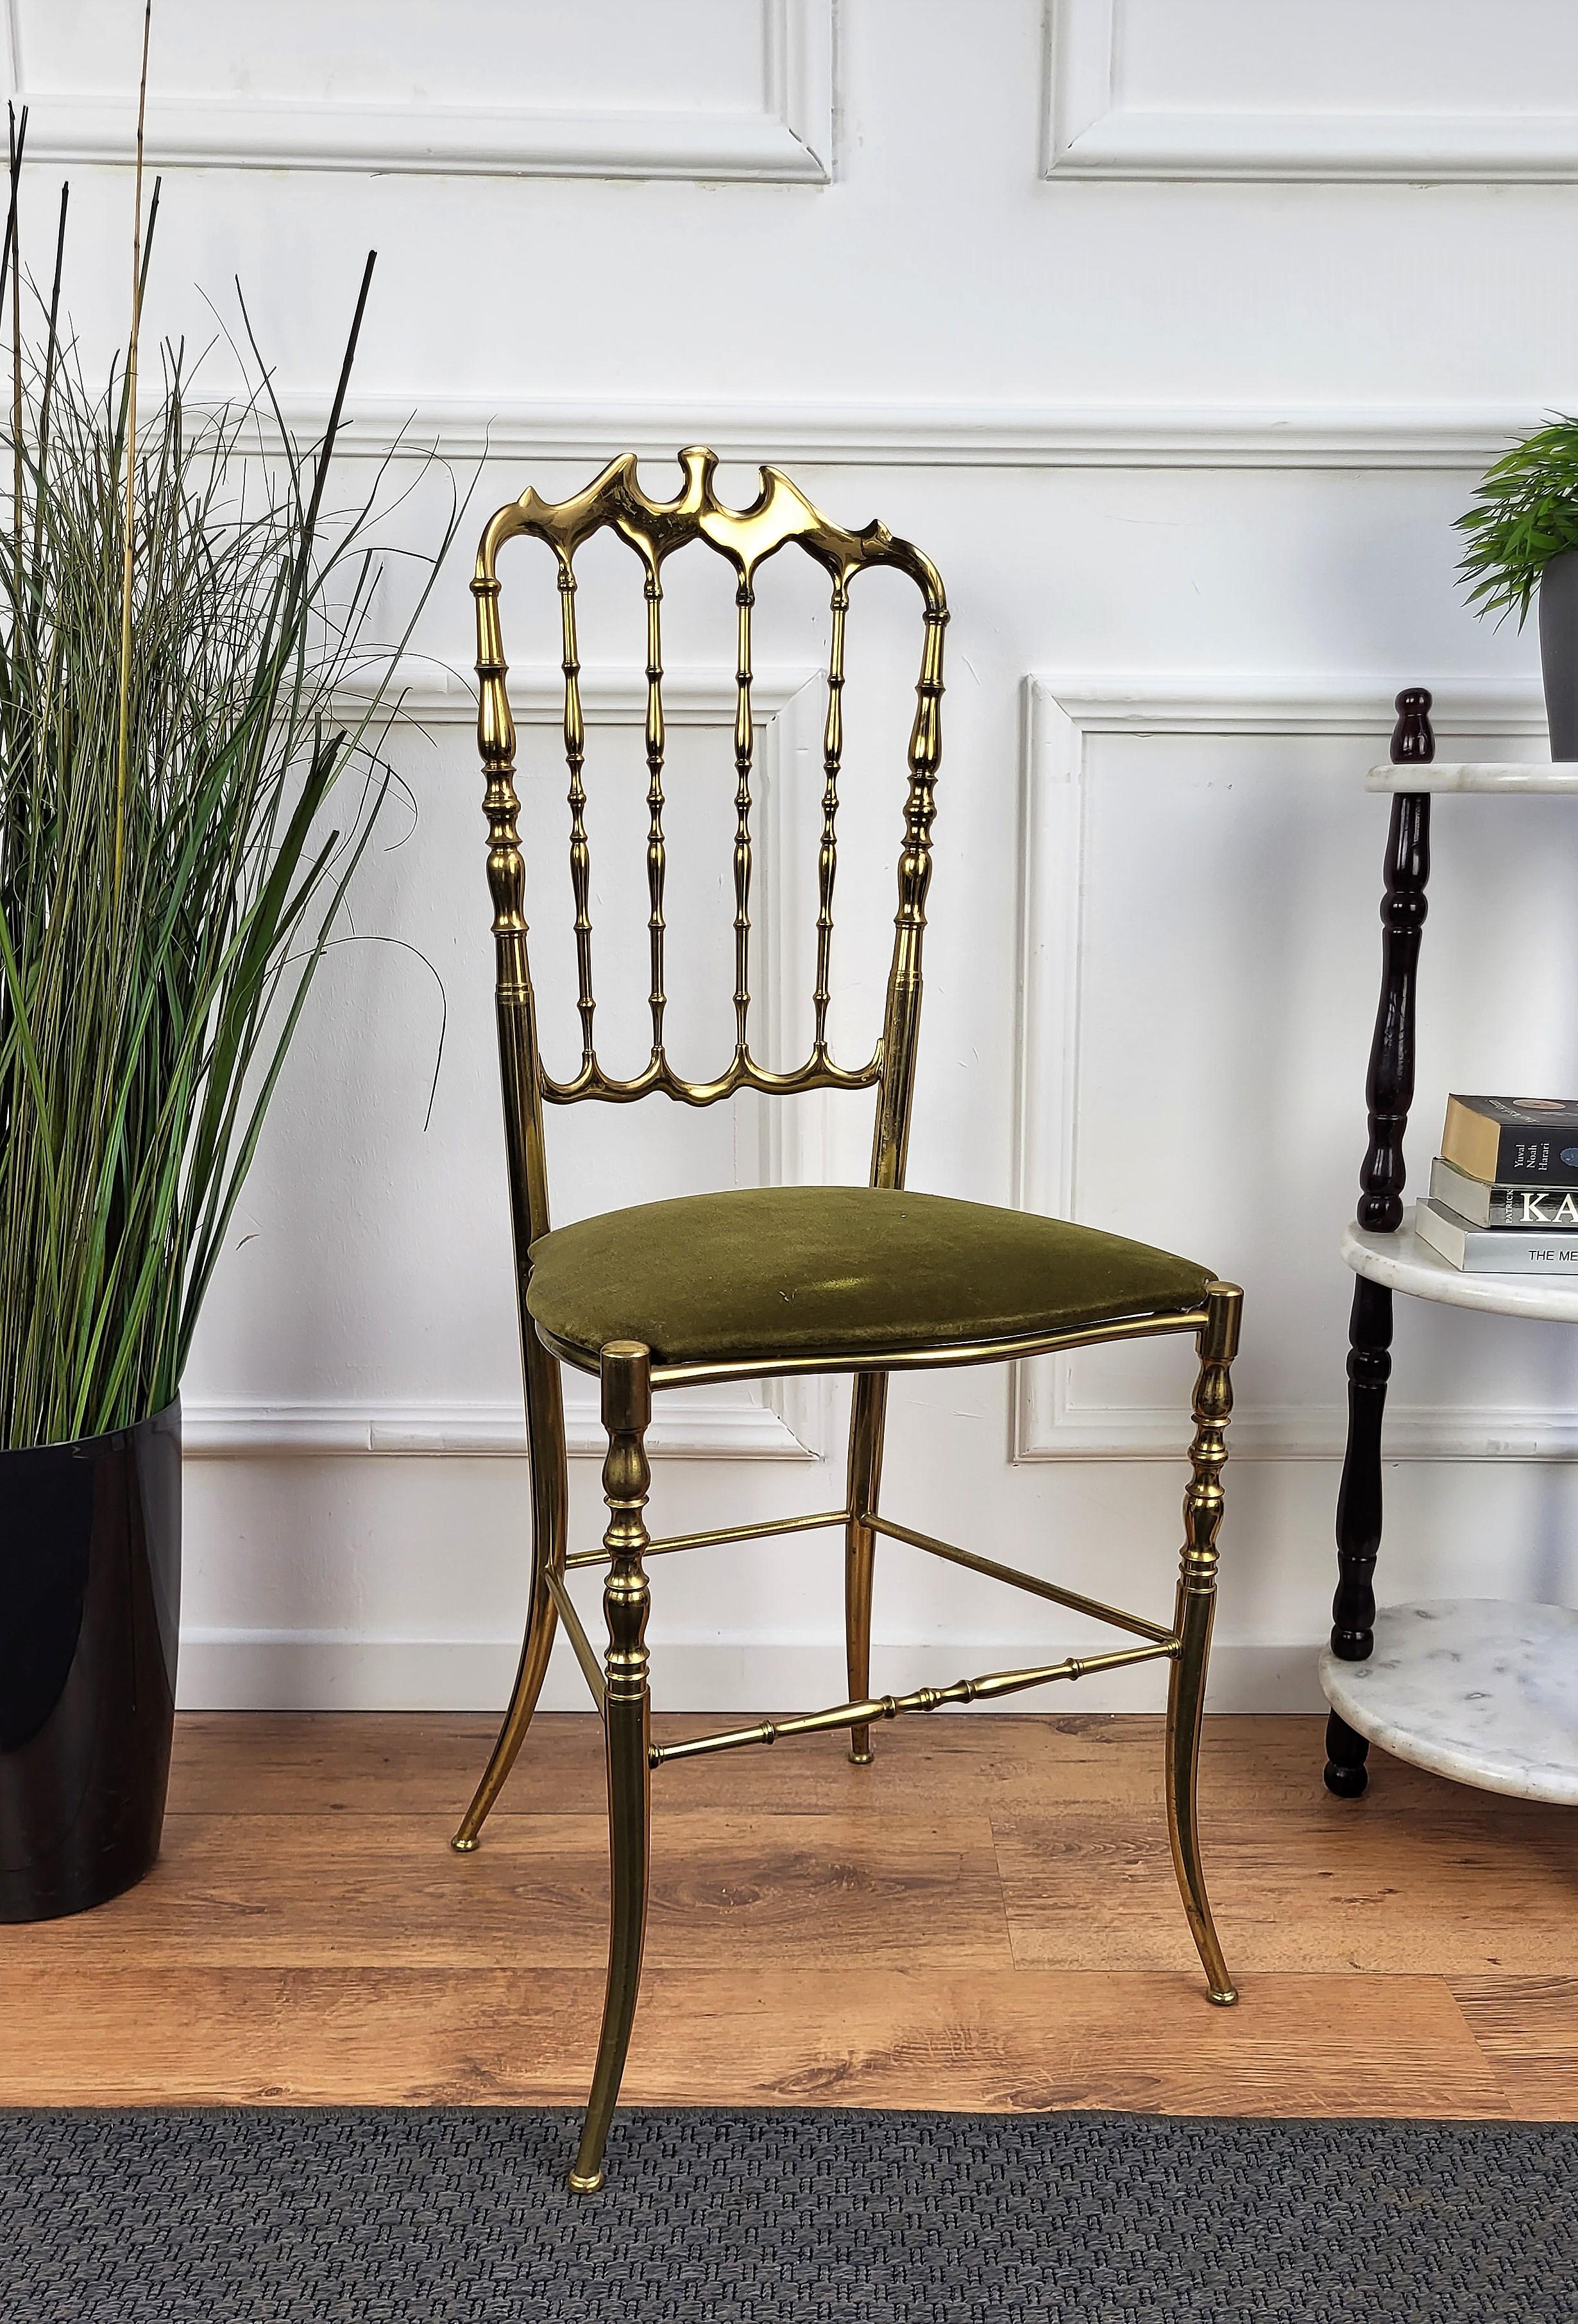 1970s Italian Chiavari gilt shiny brass chair with great vintage patina and perfect long lasting solid structure. The actual green velvet upholstery is in good condition but can be renewed to customers' preference.

Chiavari chairs are named after